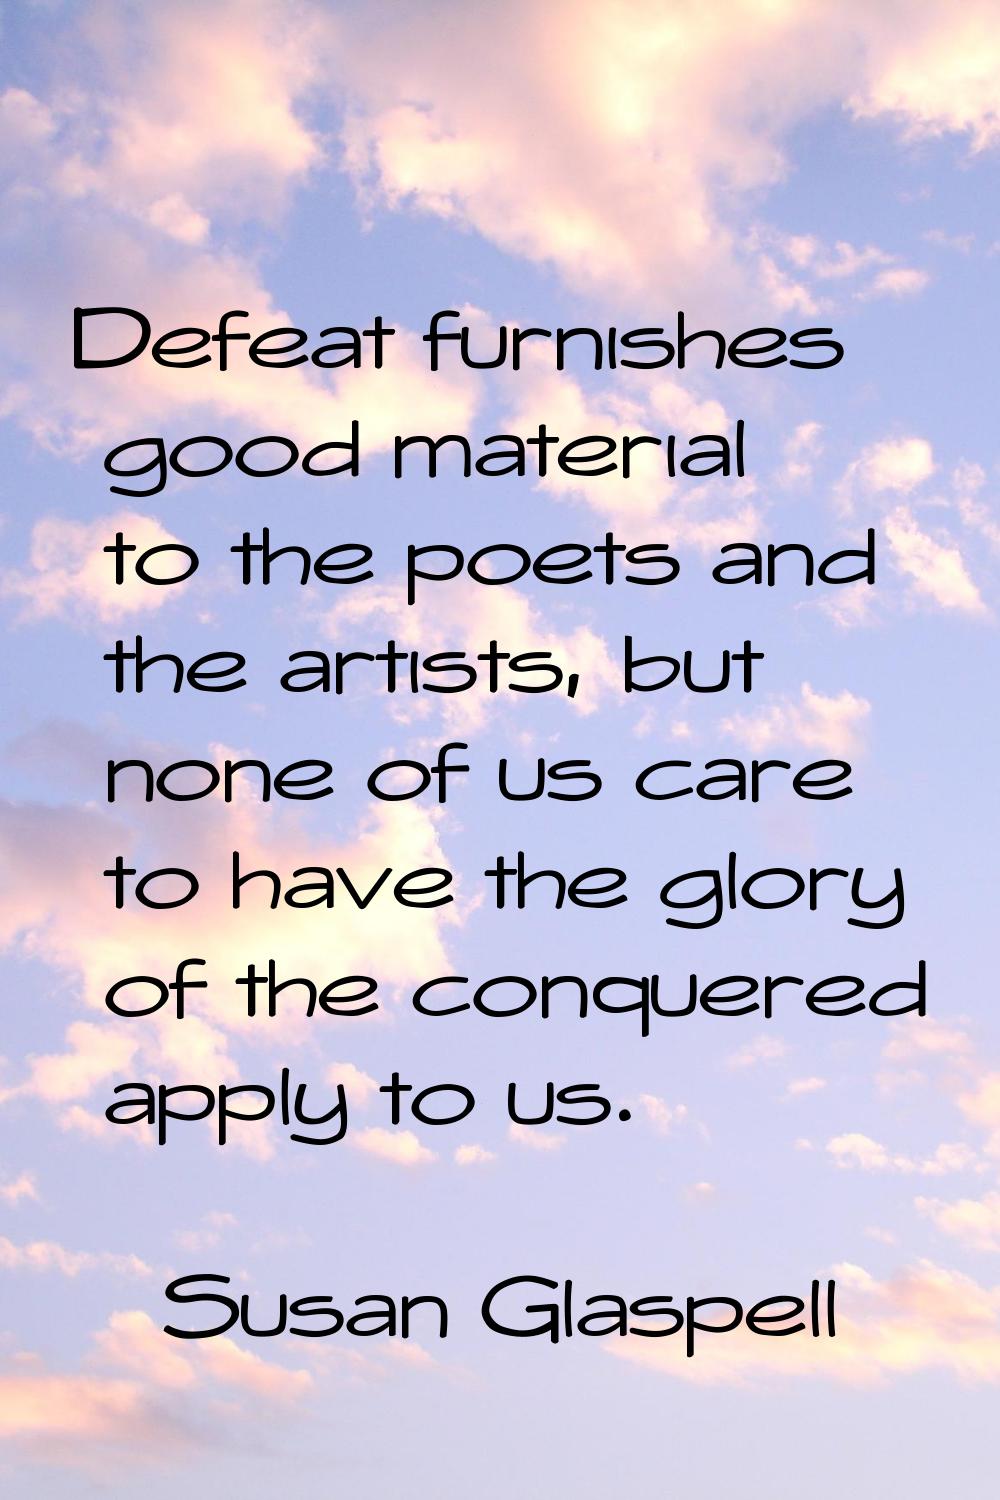 Defeat furnishes good material to the poets and the artists, but none of us care to have the glory 